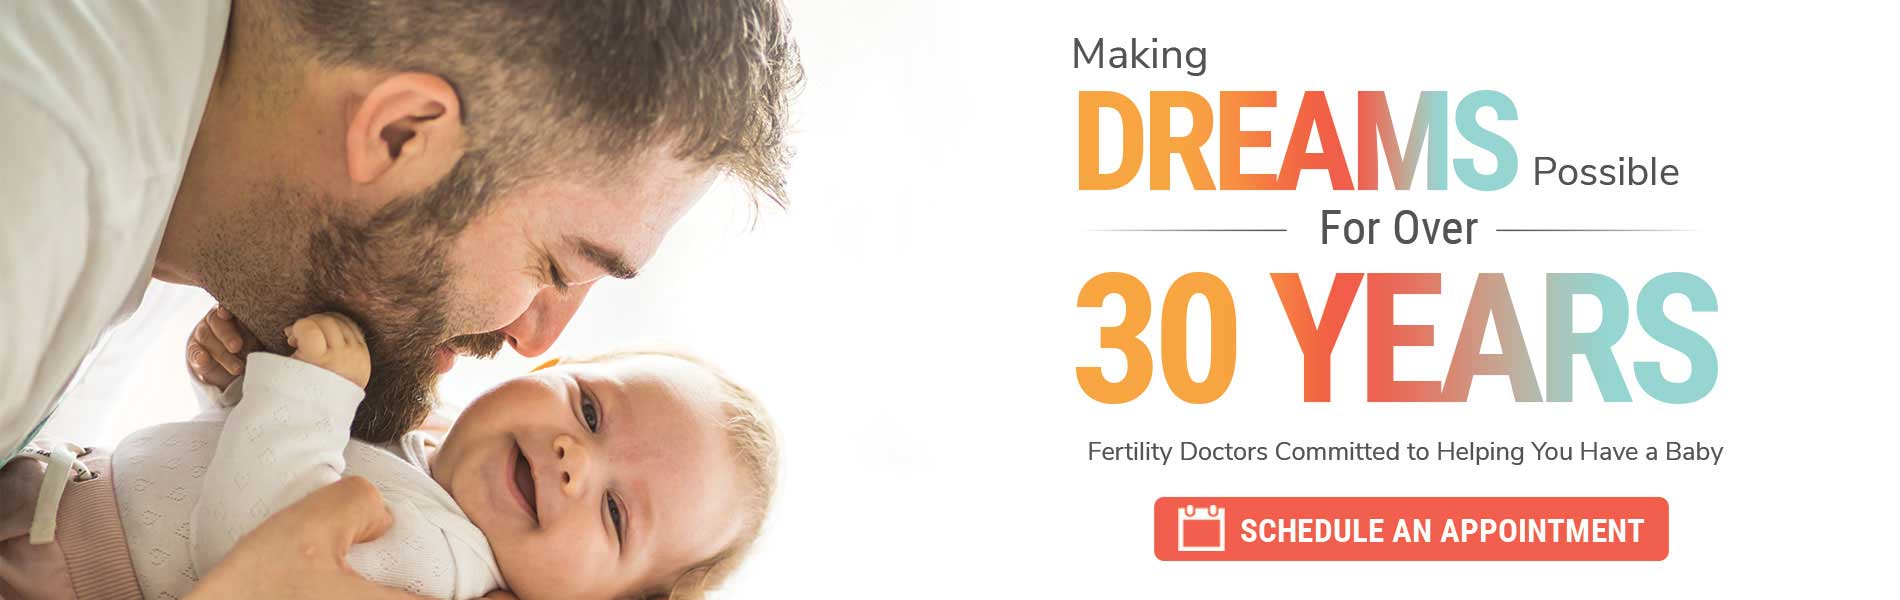 Making Dreams Possible for over 30 Years - Fertility Doctors Committed to Helping You Have a Baby